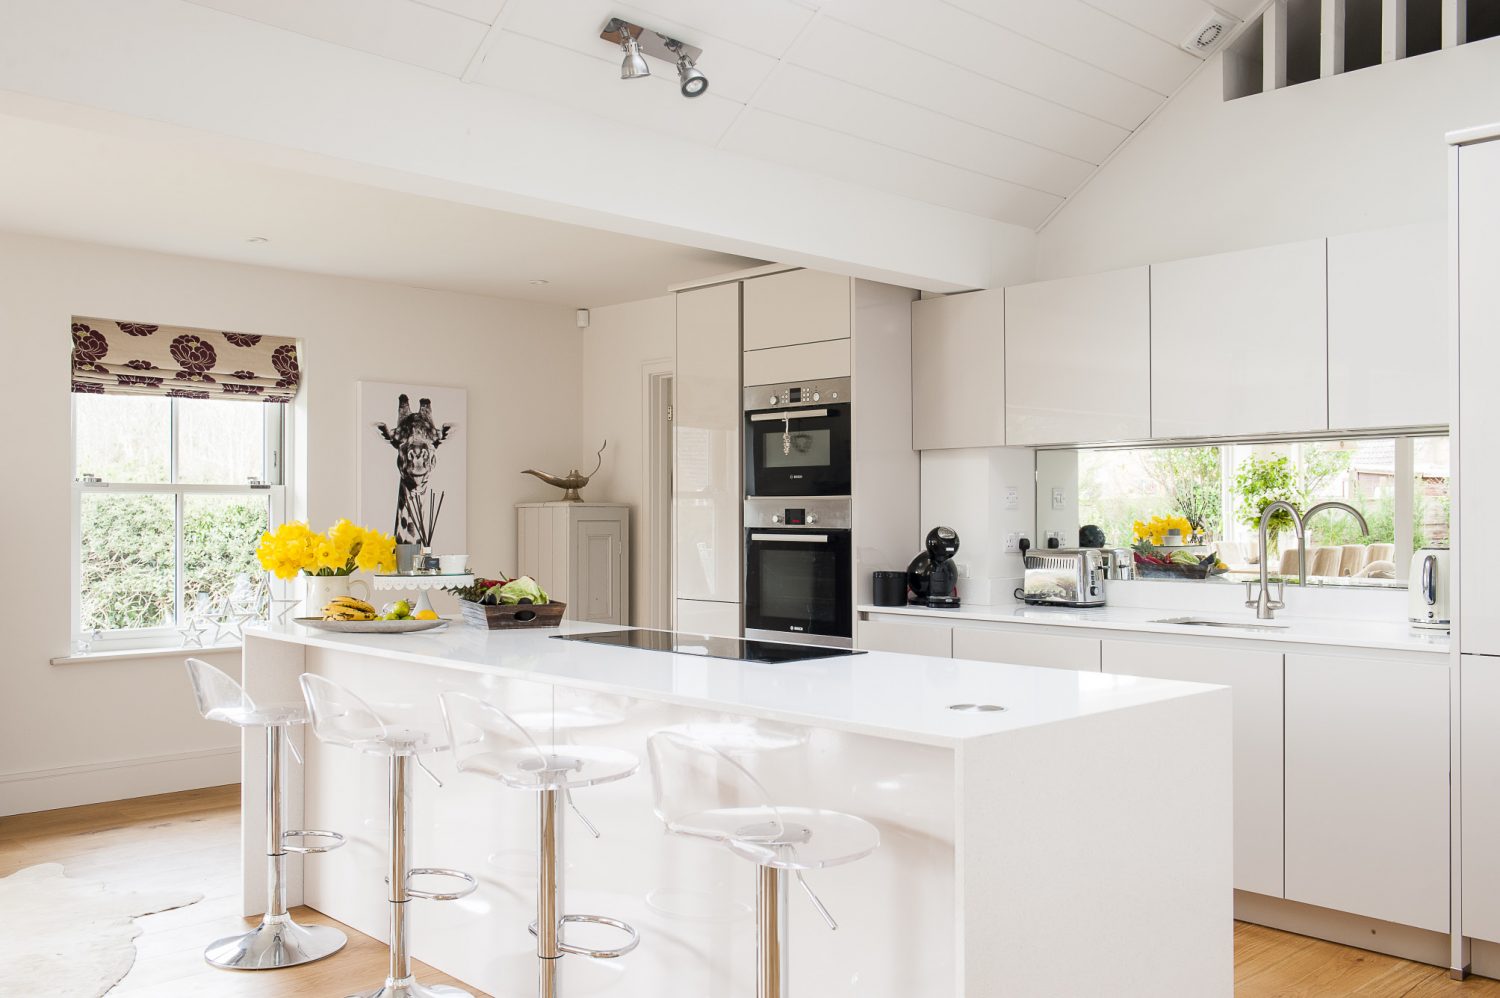 The spacious kitchen was designed and supplied by Martins of Hawkhurst. The panelled vaulted ceiling gives the Kittermasters’ home a beach-house feel